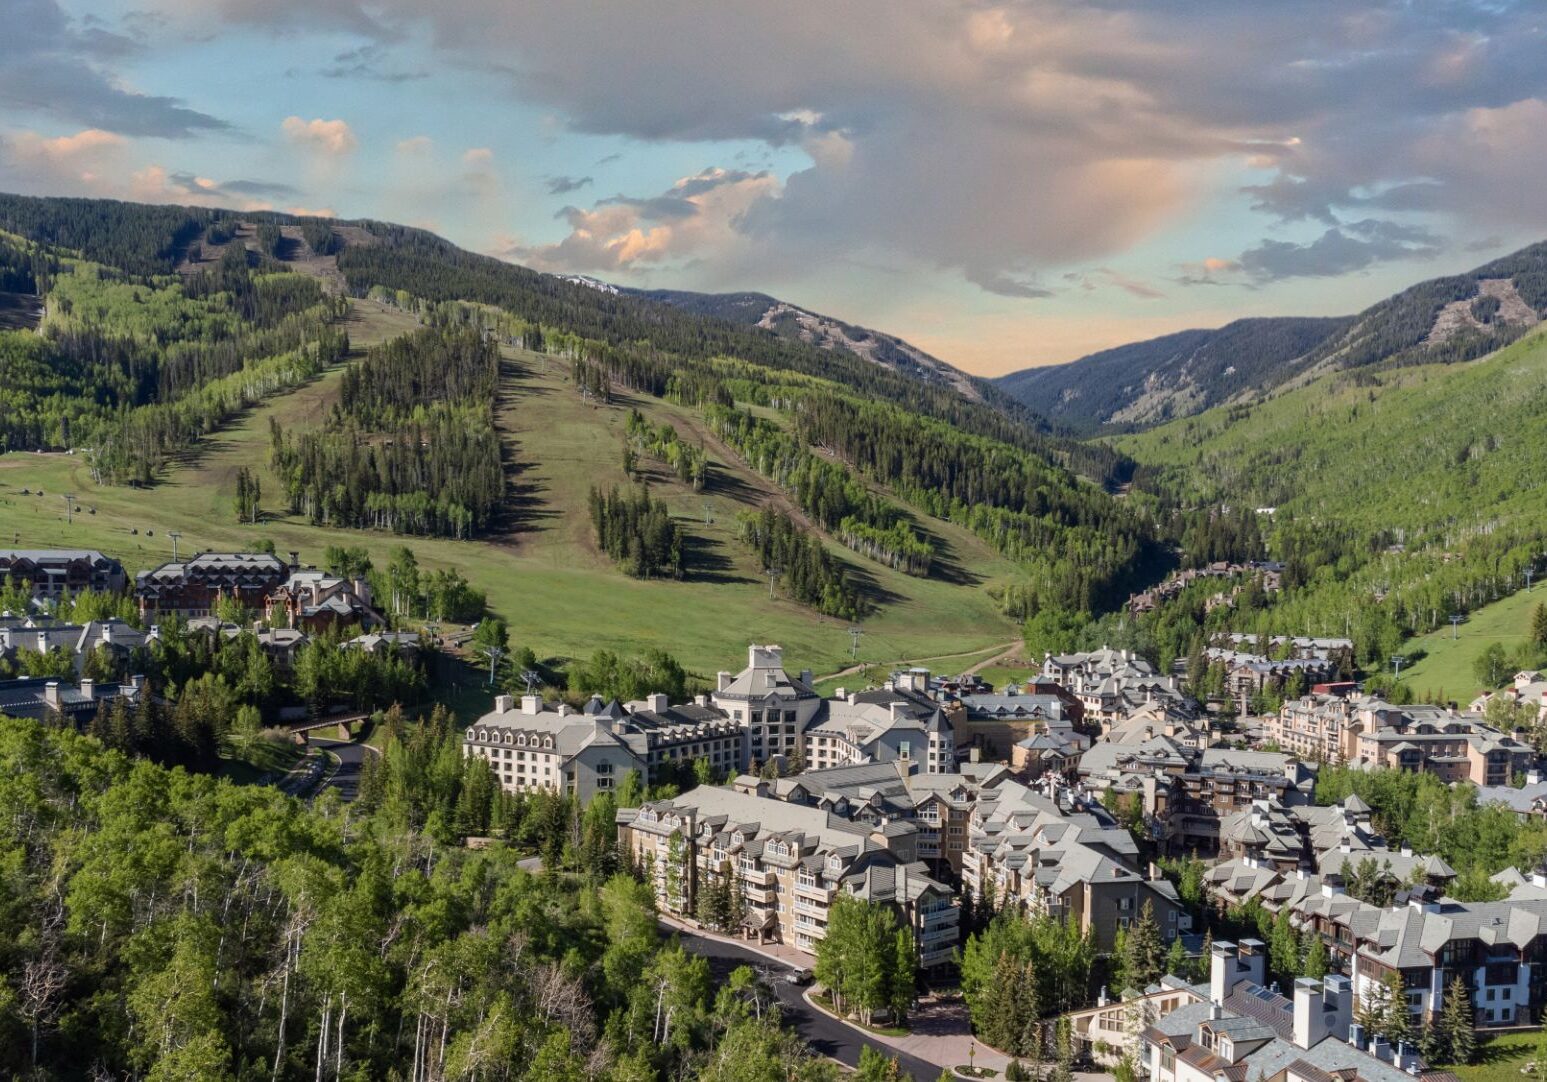 St James Place in Beaver Creek